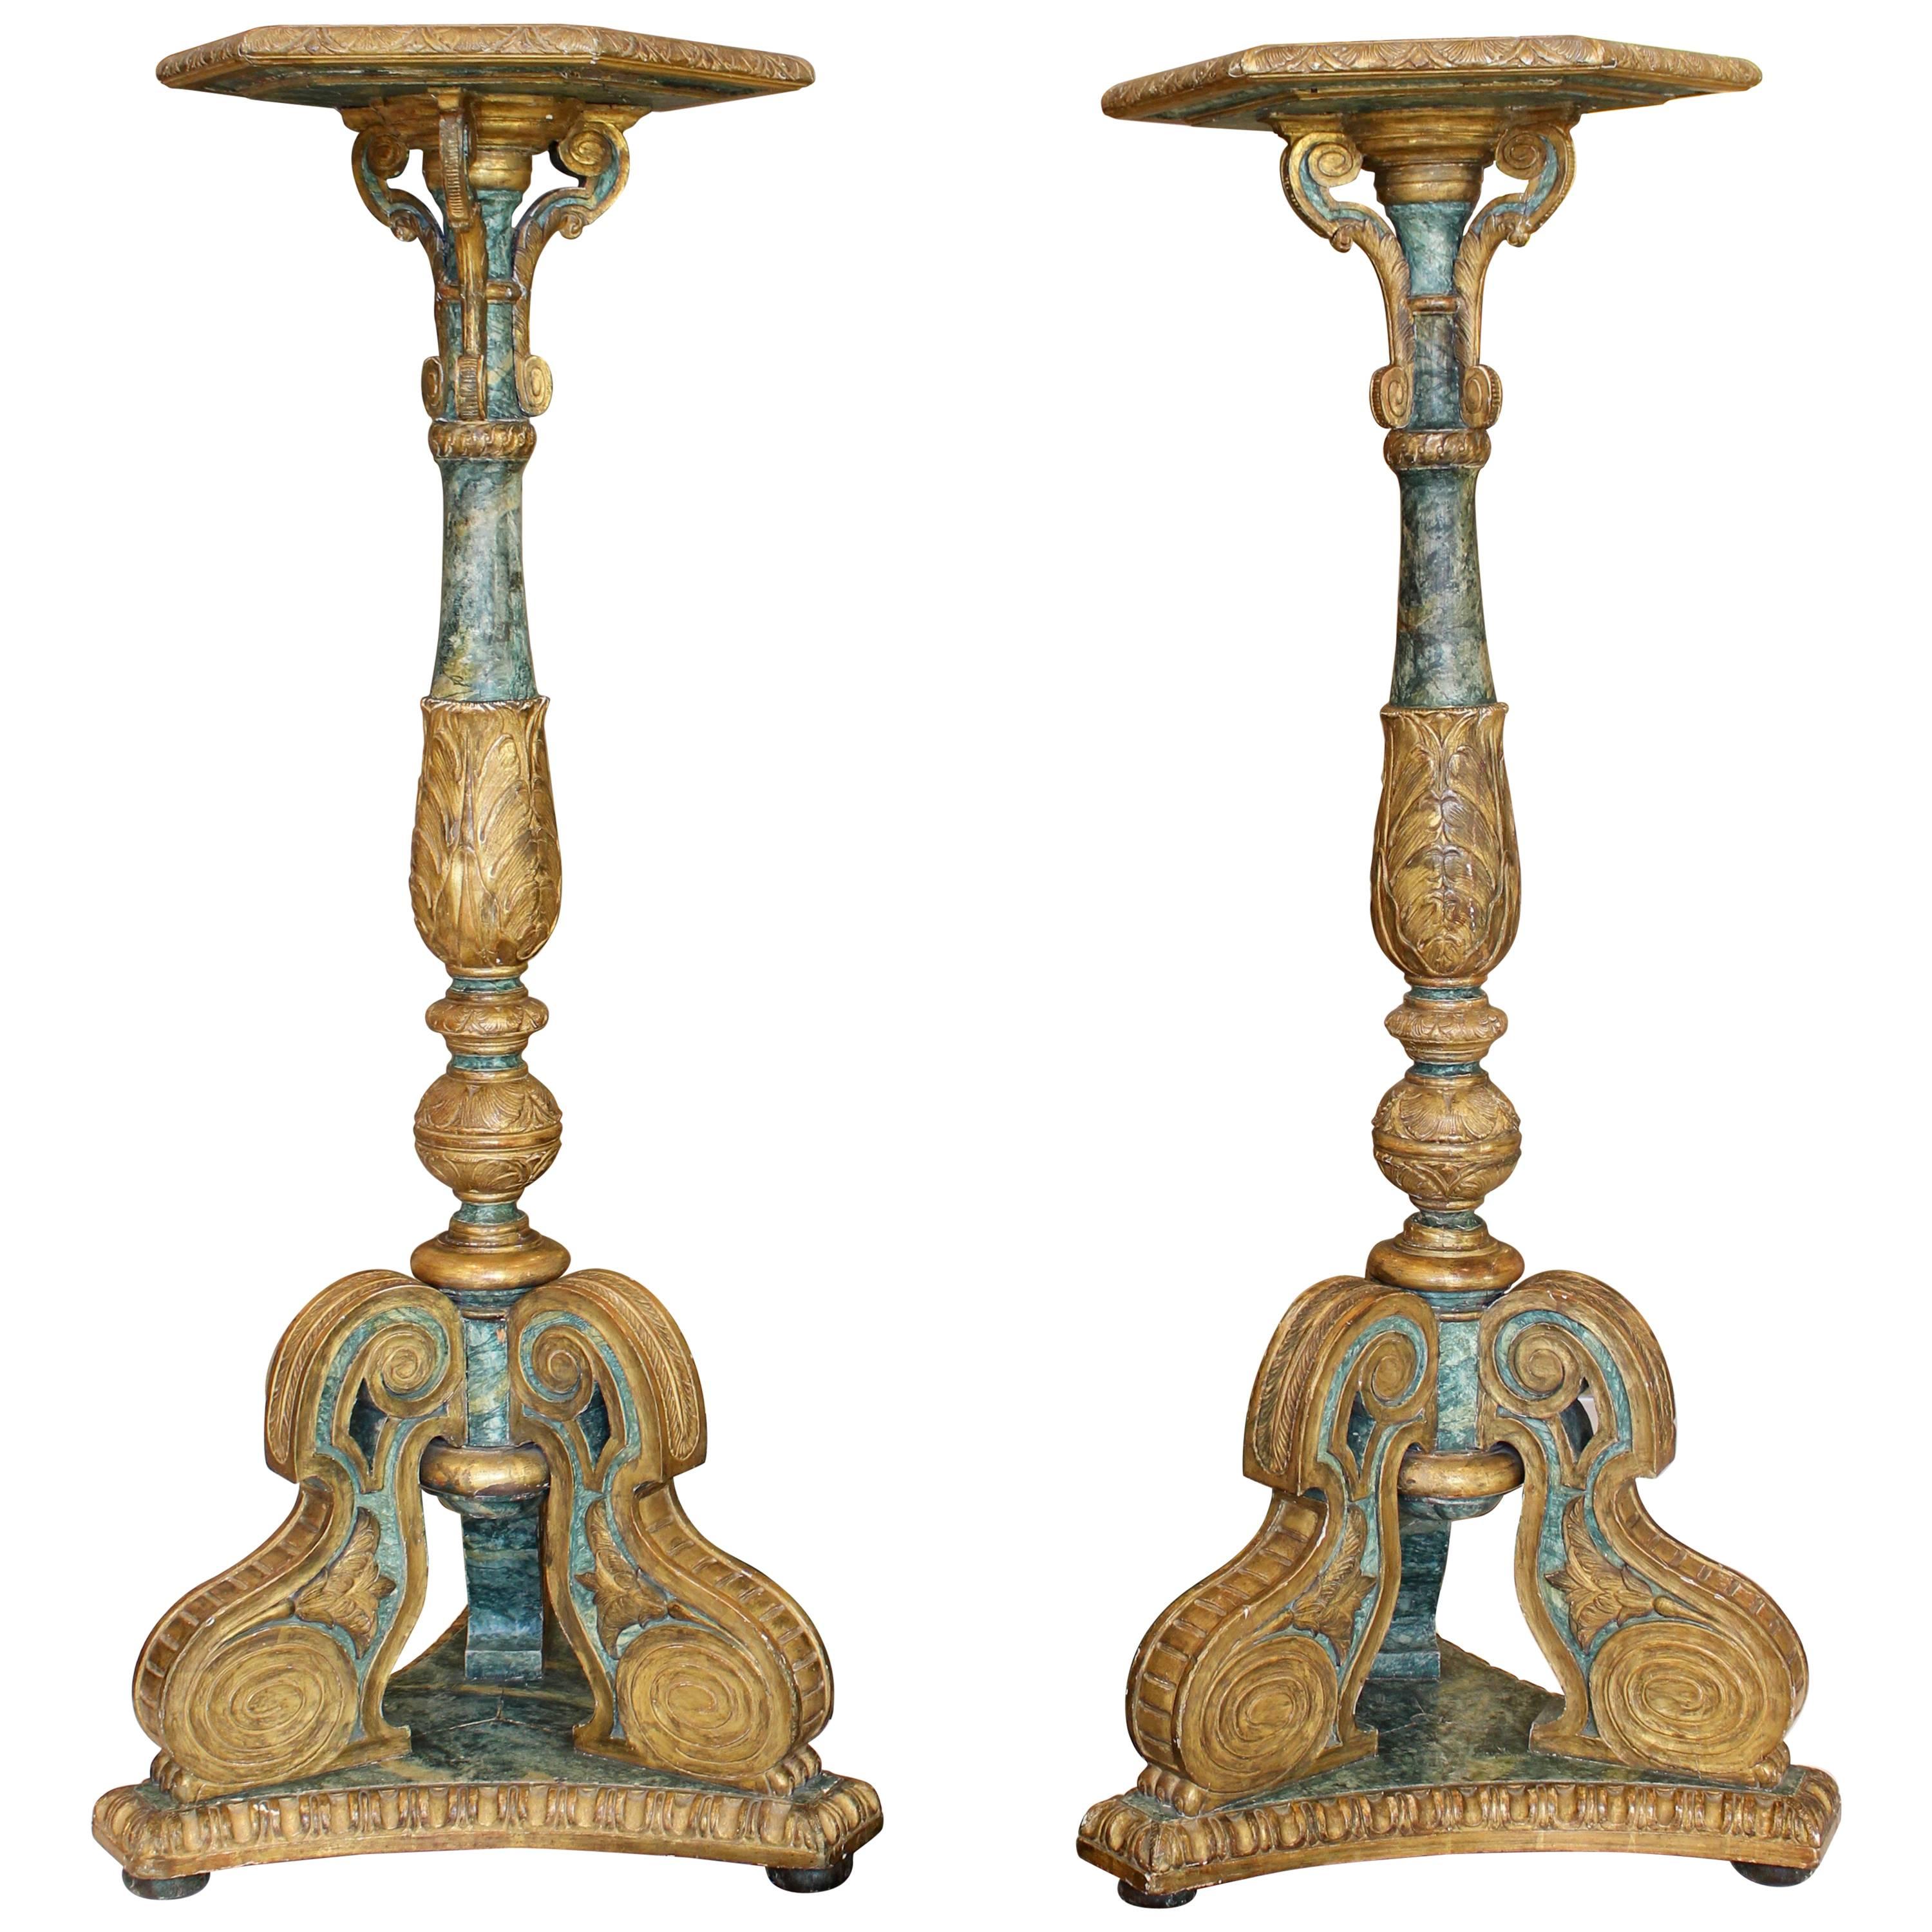 Pair of South European Faux Marble Painted and Parcel-Gilt Wooden Torchères